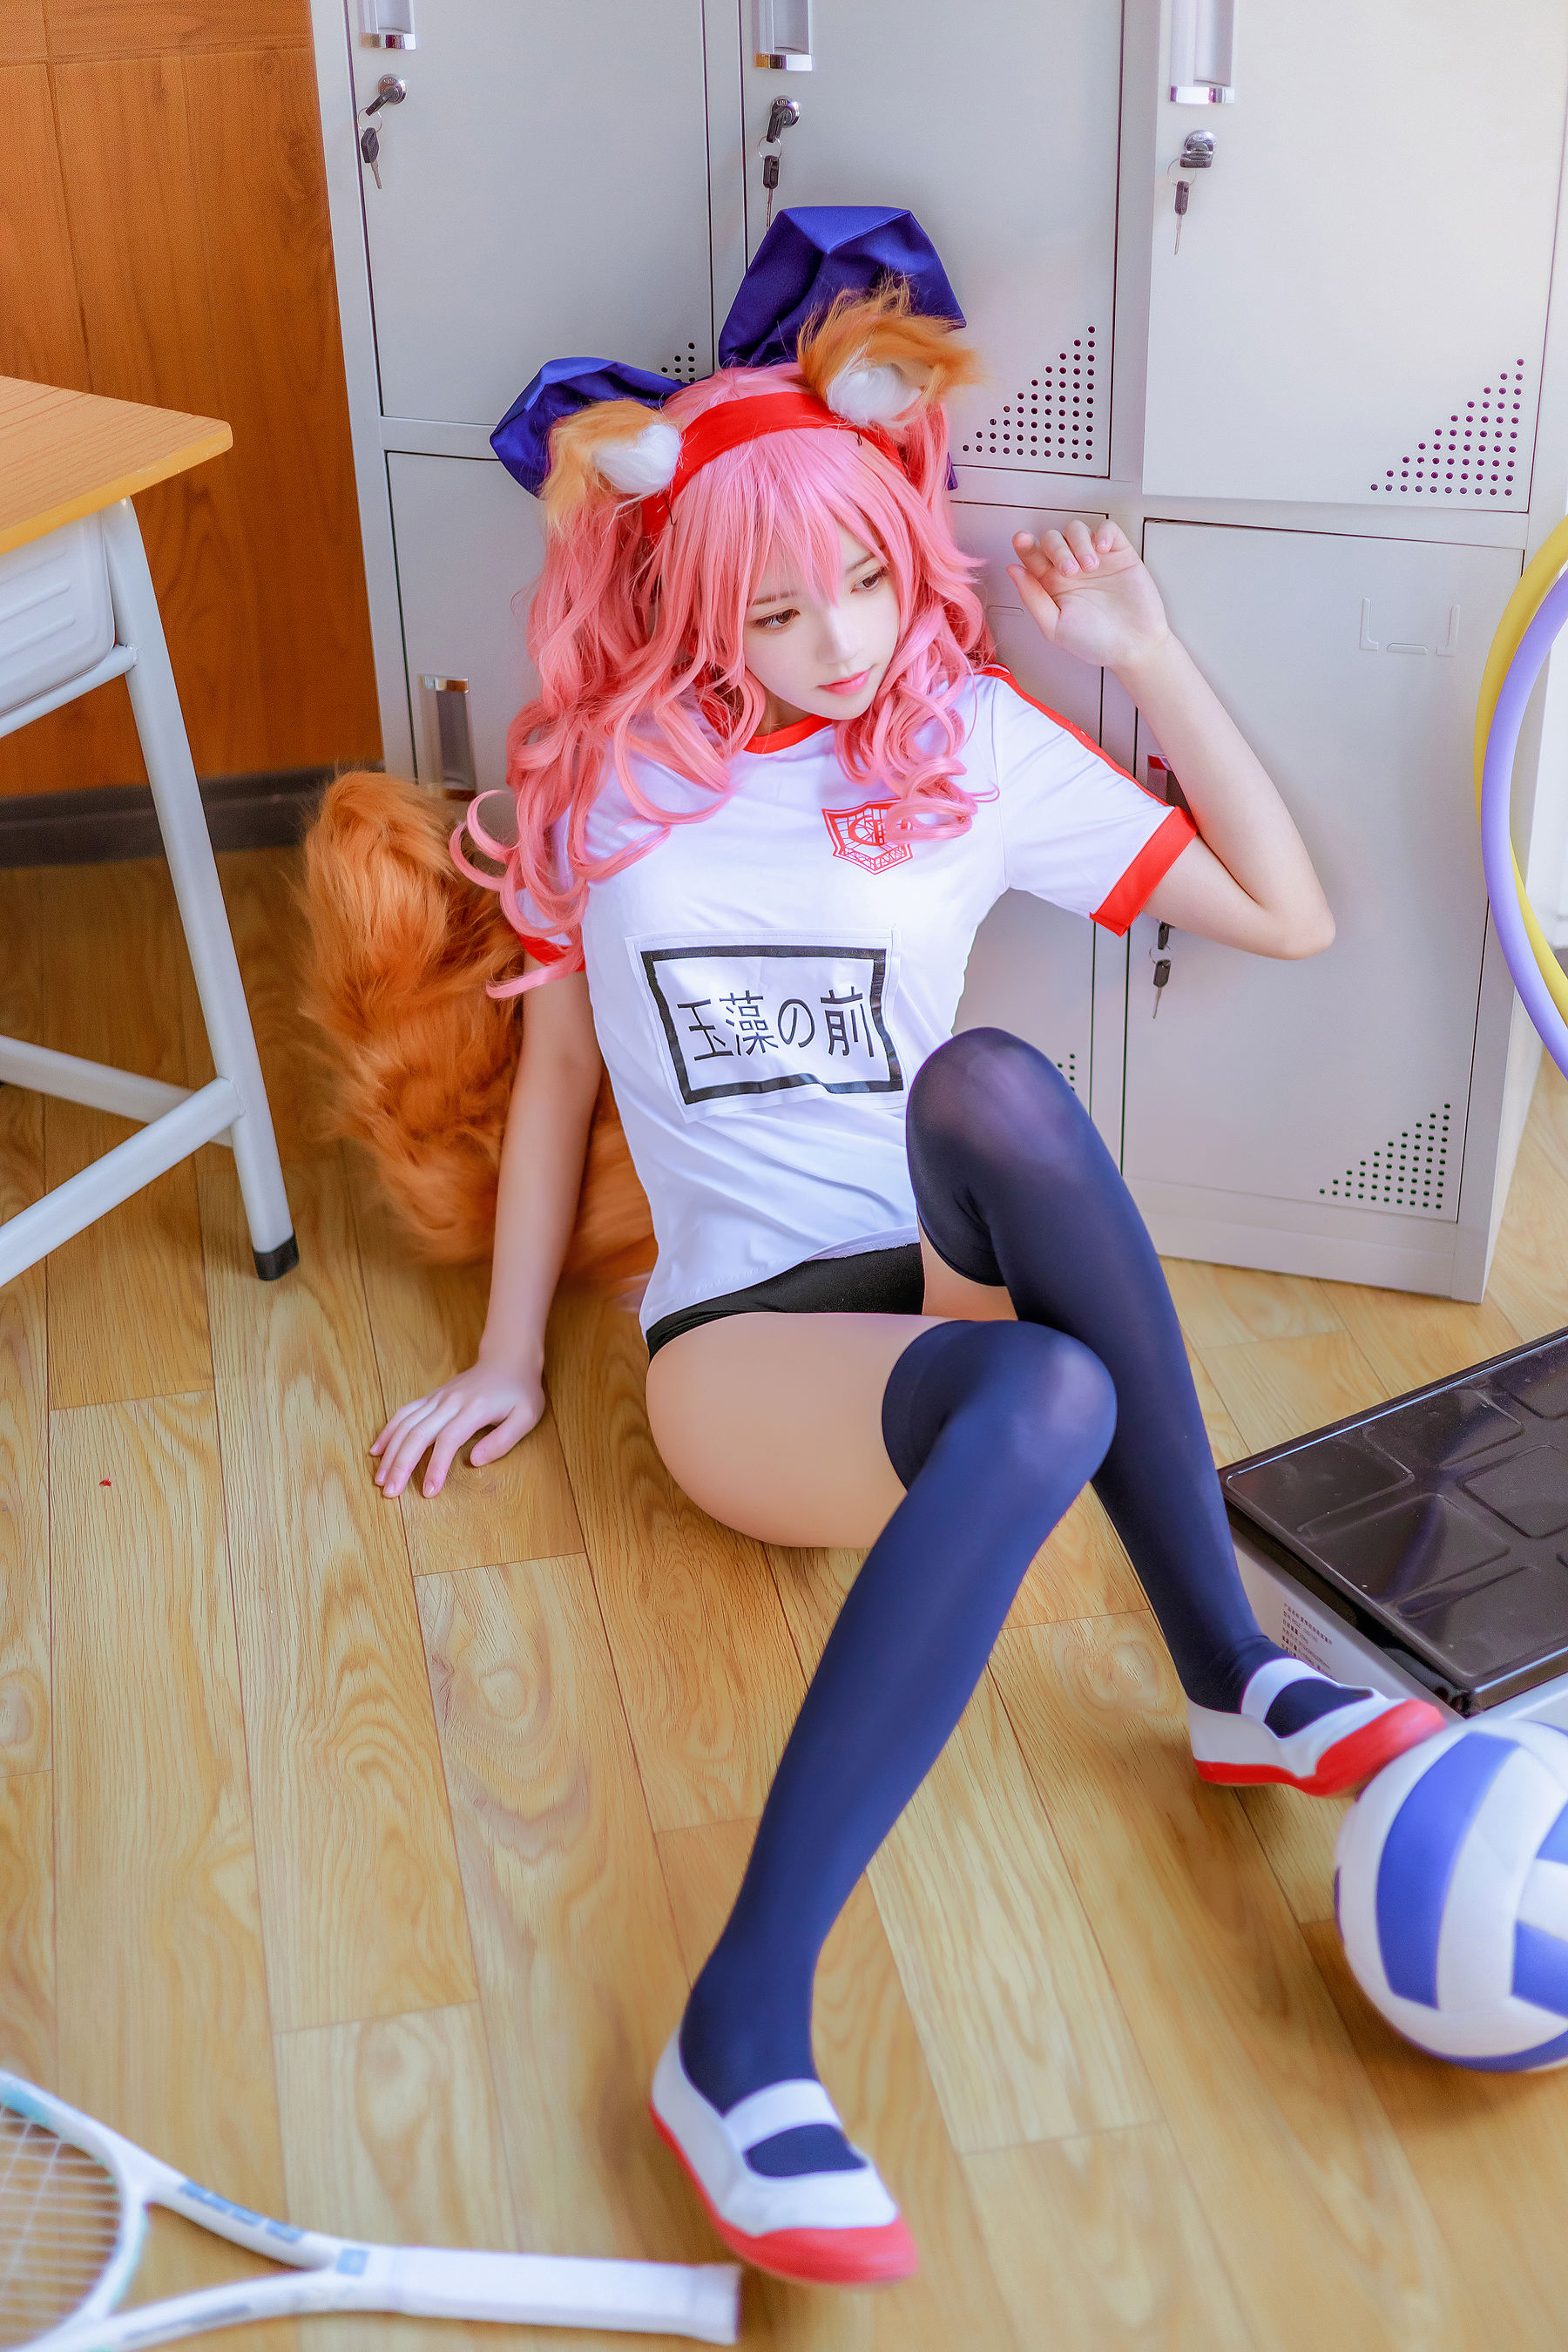 [Net Red COSER Photo] Cherry Peach Meow - Tamamo former gym suit Page 19 No.580a8b